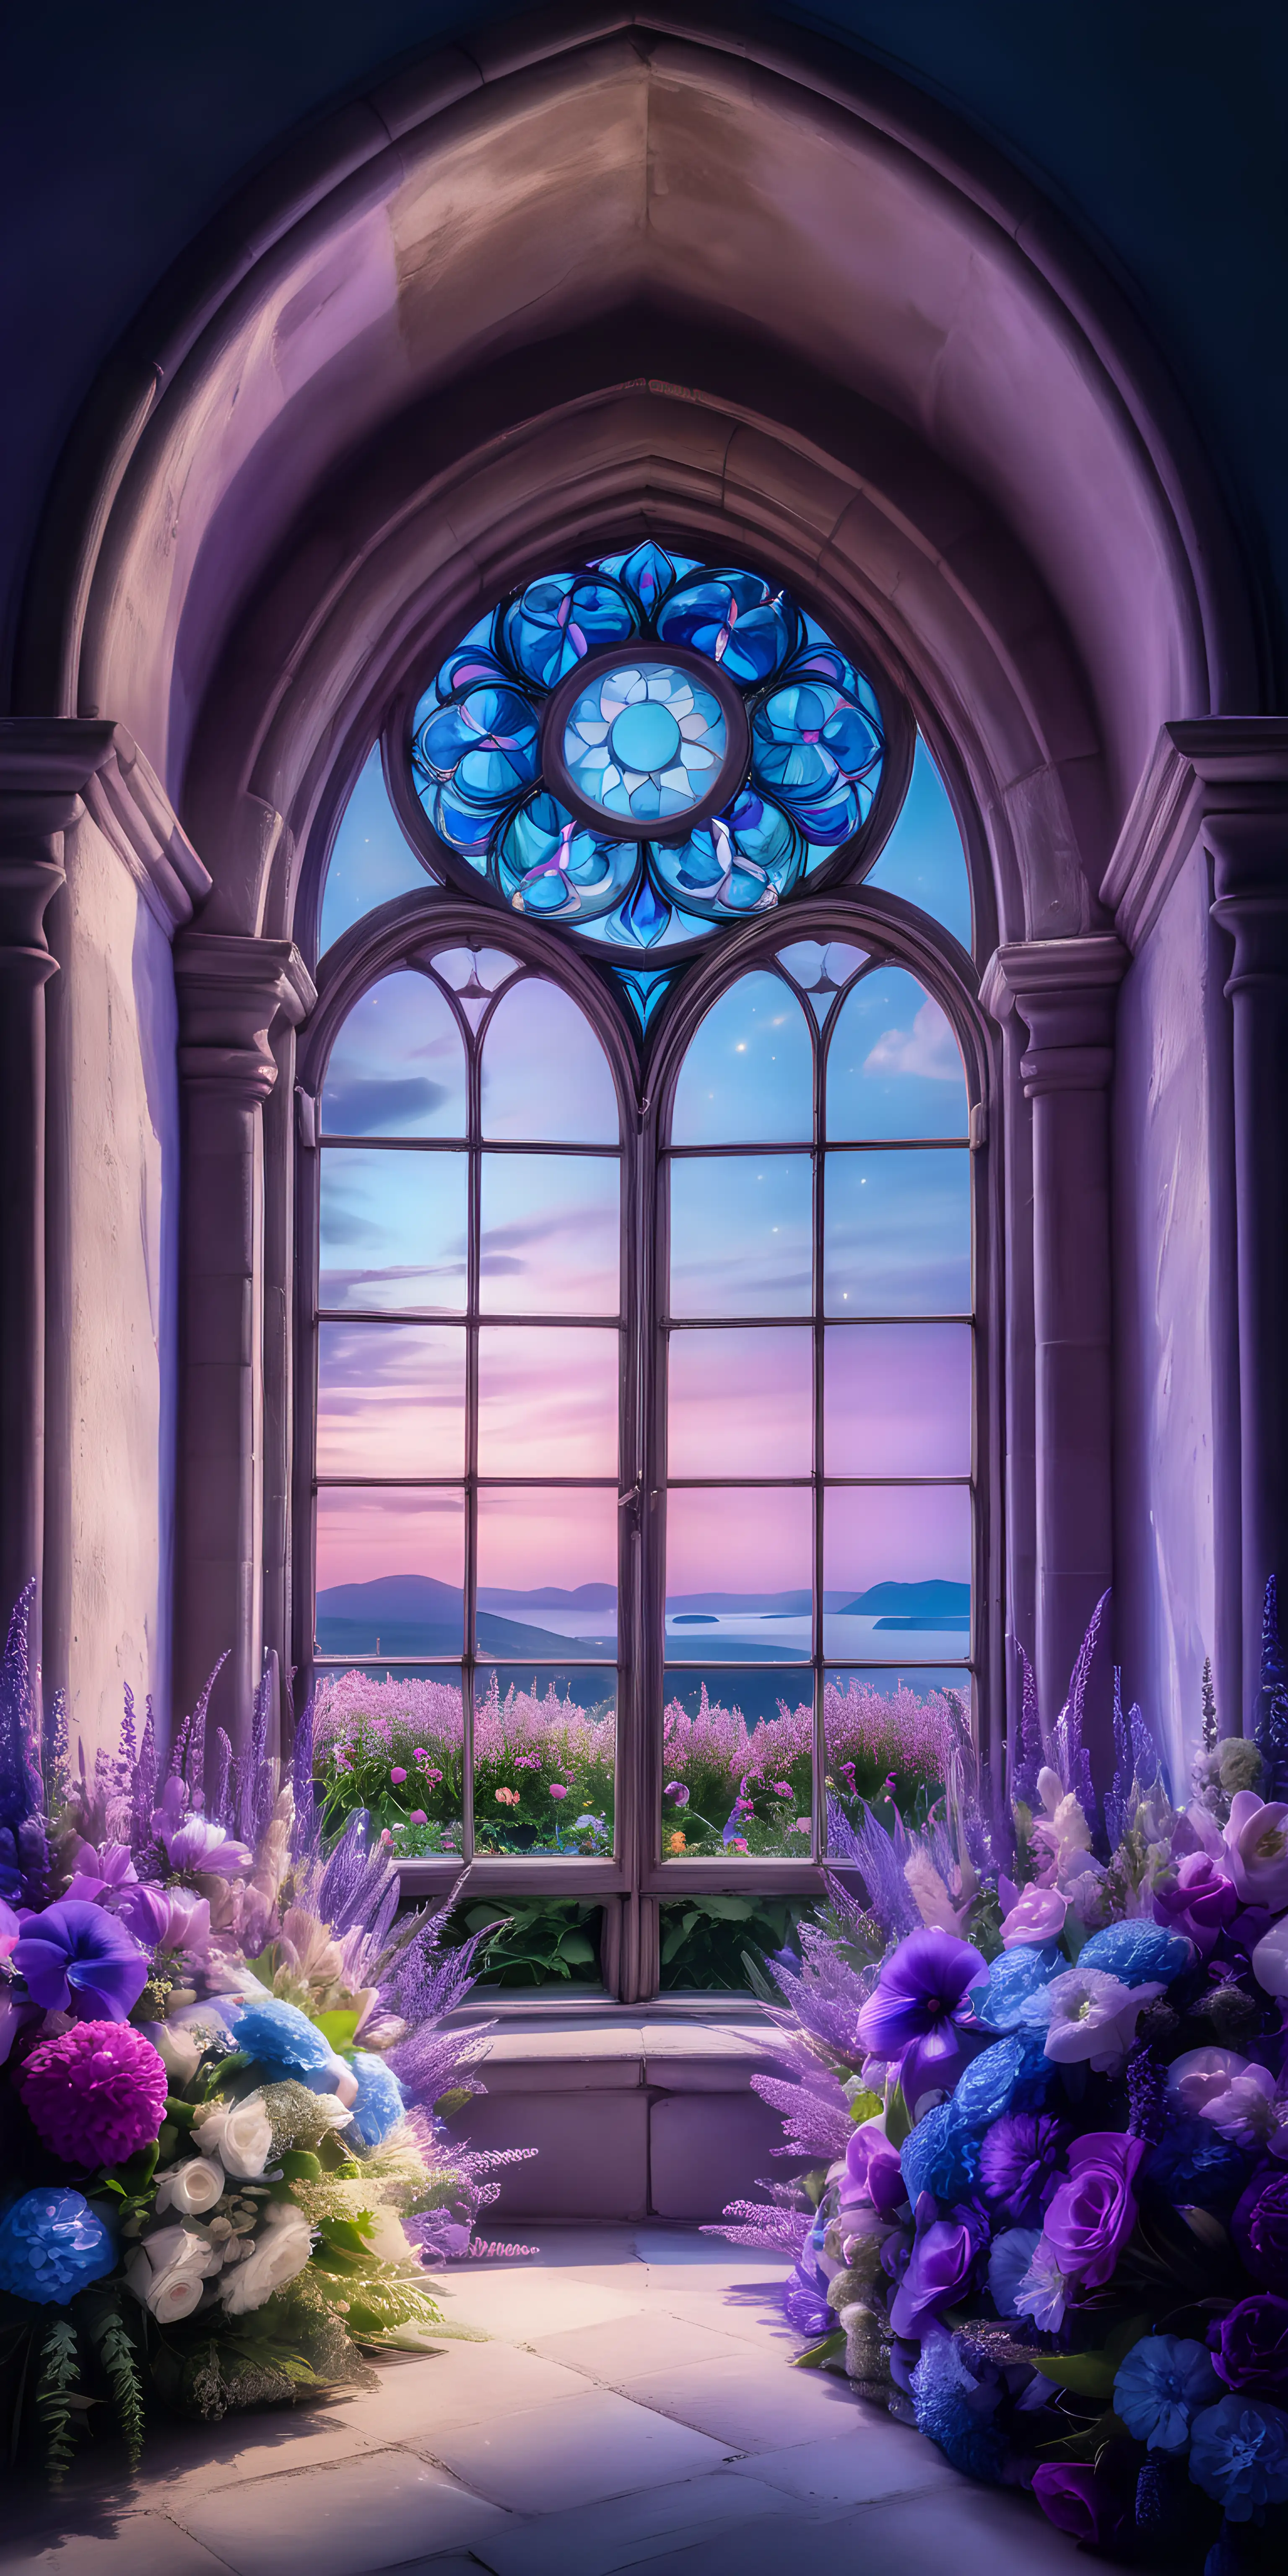 the setting is a magical arched window vignette surrounded by flowers in a circle in purples and blues. It is lit from a window on the left.  There is space in the foreground for a person, but there are no people in the image